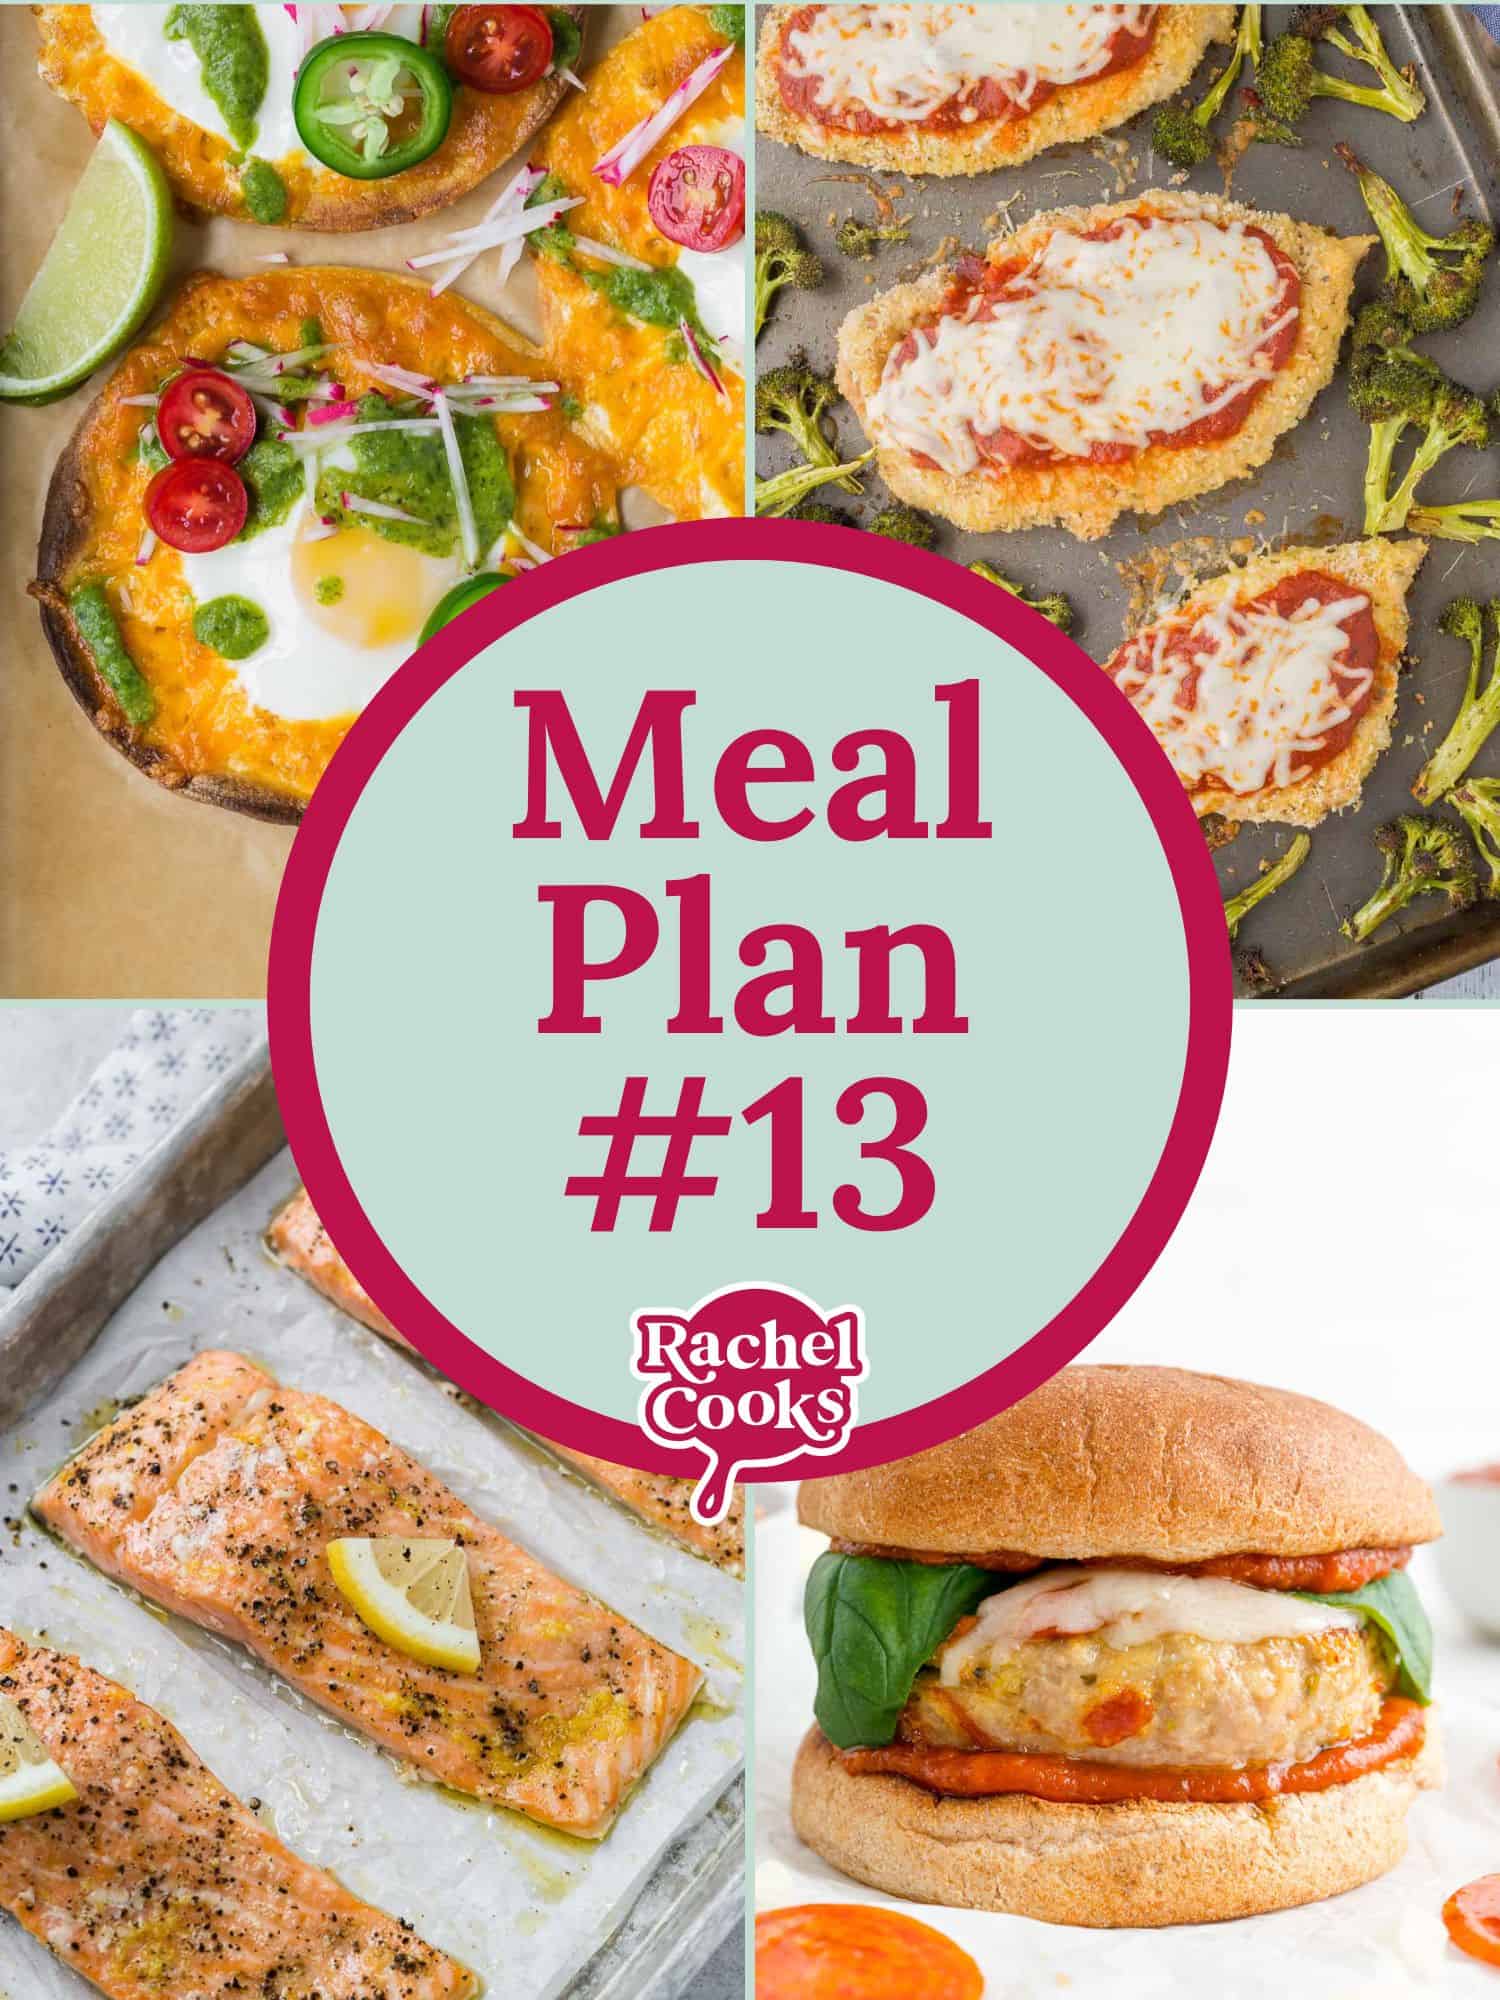 Meal plan 13 post graphic with images of recipes.